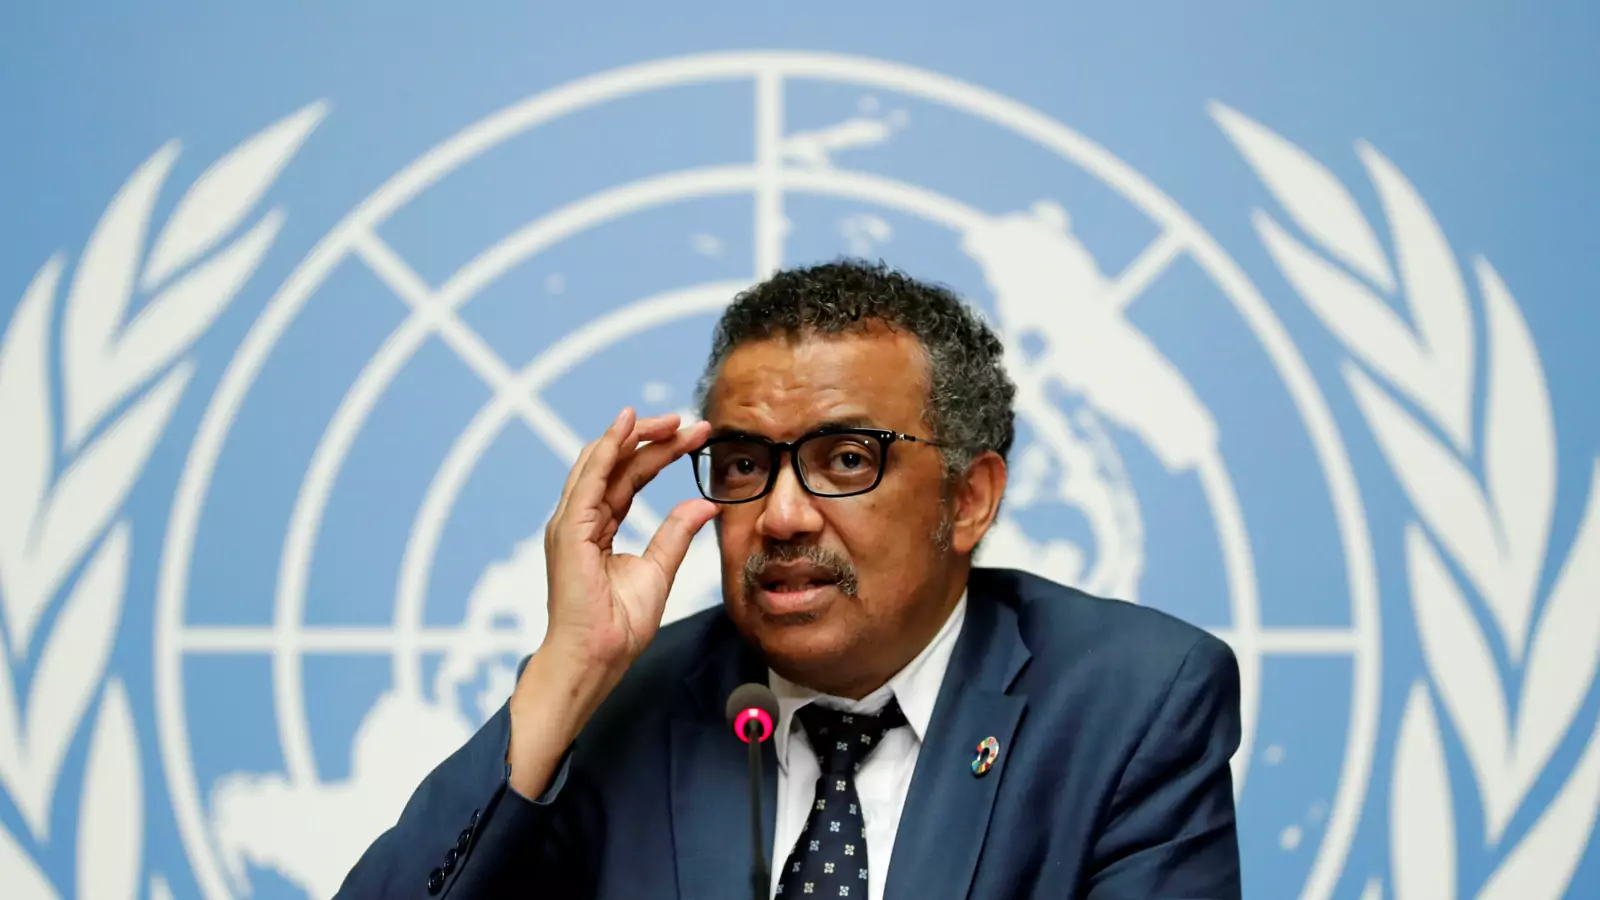 A Scorecard for Dr. Tedros as the WHO's Director-General | Council on Foreign Relations